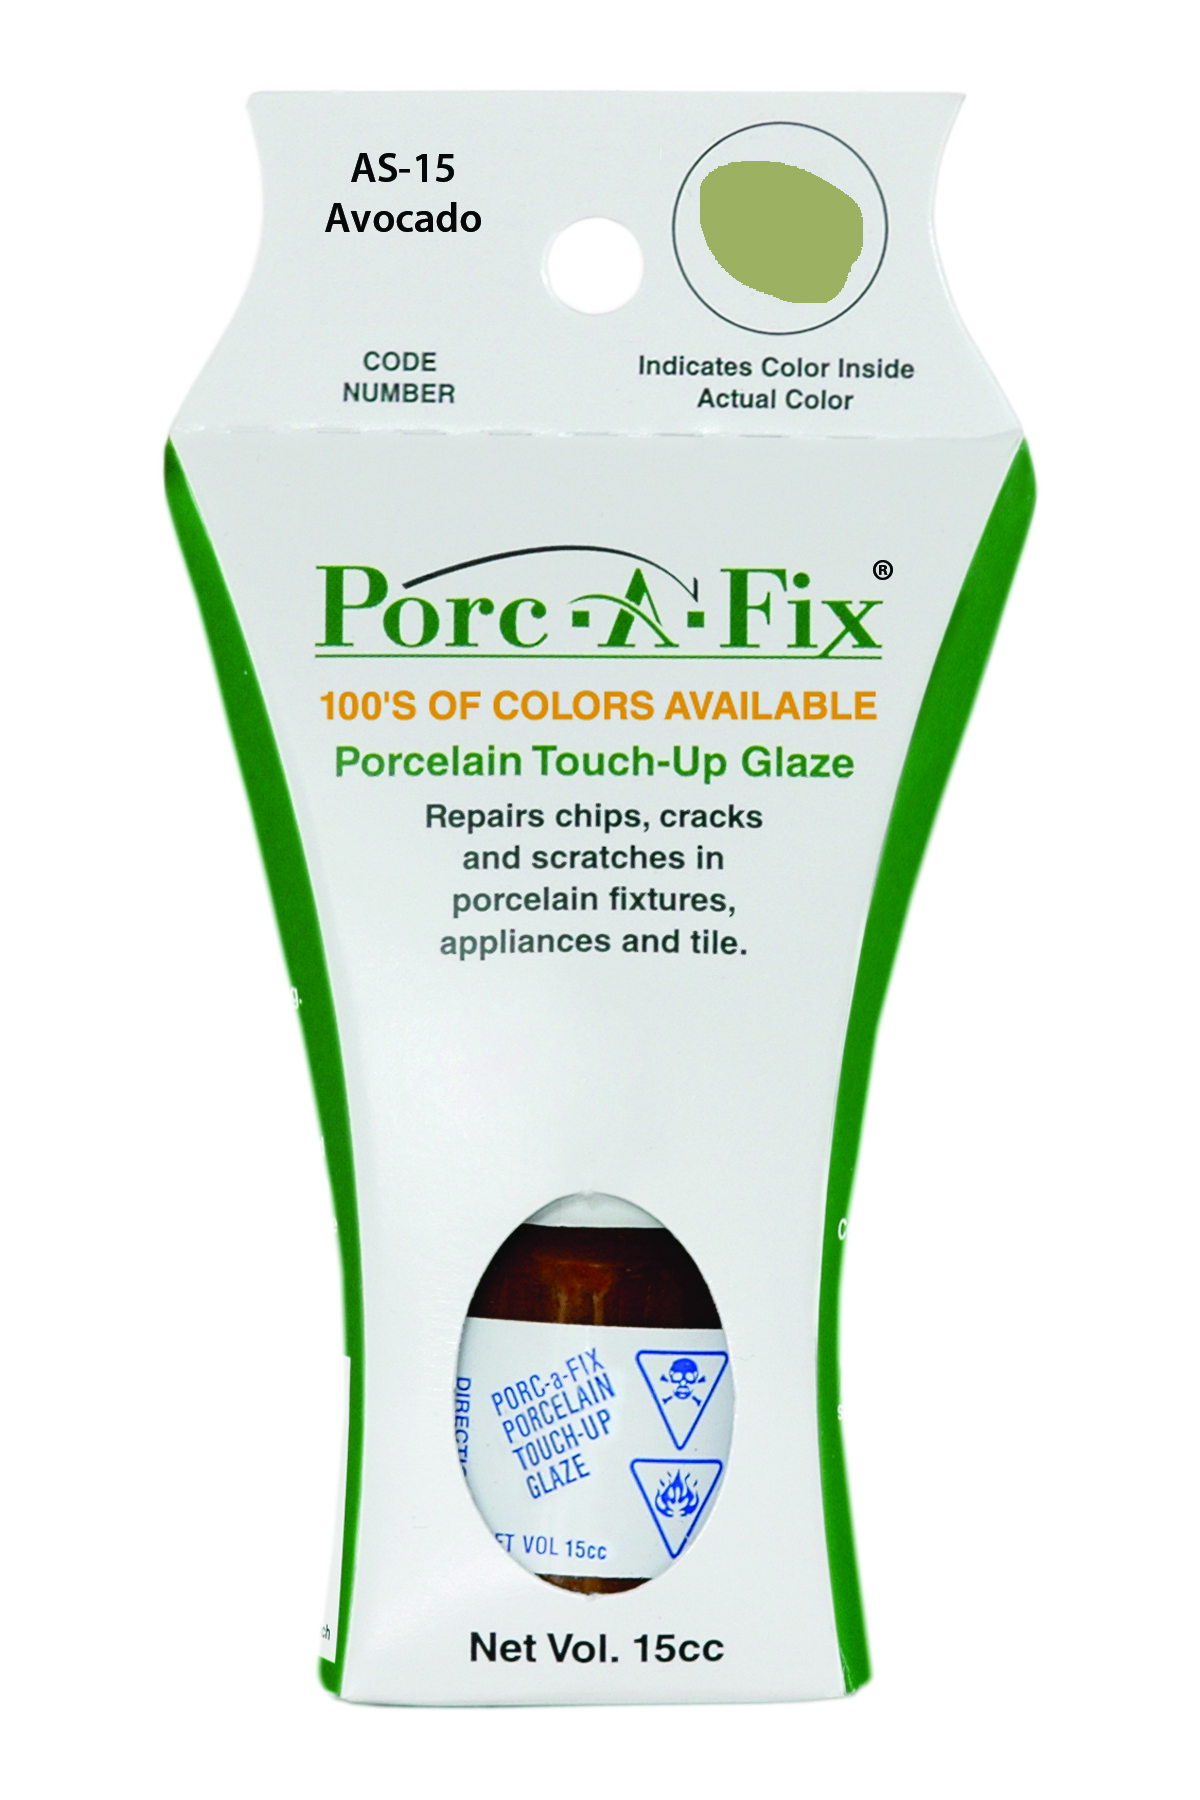 Fixture-Fix | AS-15 | Porc-A-Fix Touch-Up Glaze American Standard Avocado - Compatible with American Standard 070900-0230A Touch Up Paint Kit - AVOCADO